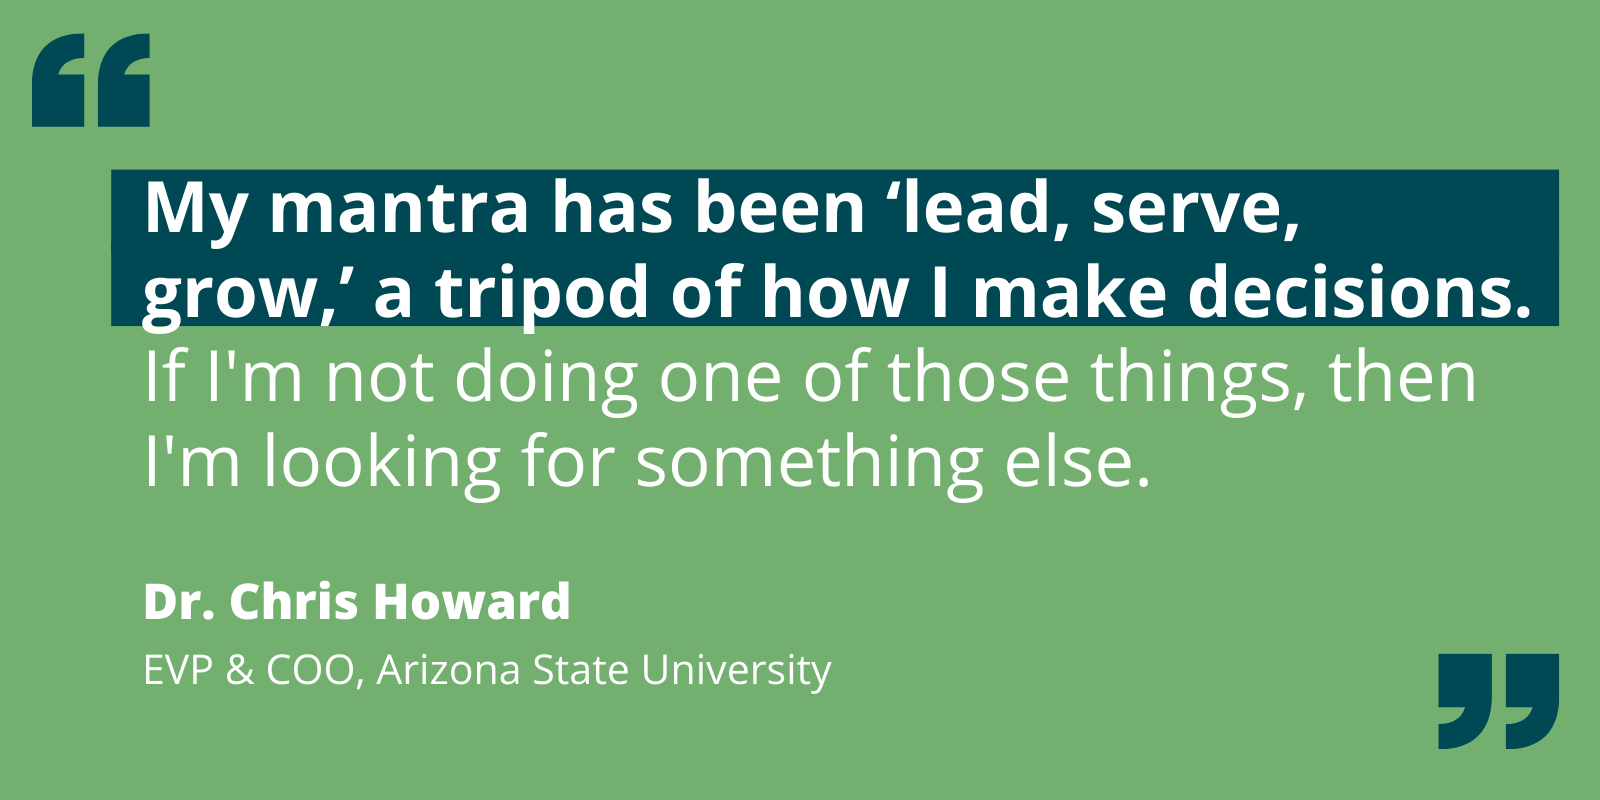 Quote by Chris Howard re: how his decisions are based on the mantra of “lead, serve, grow.” 